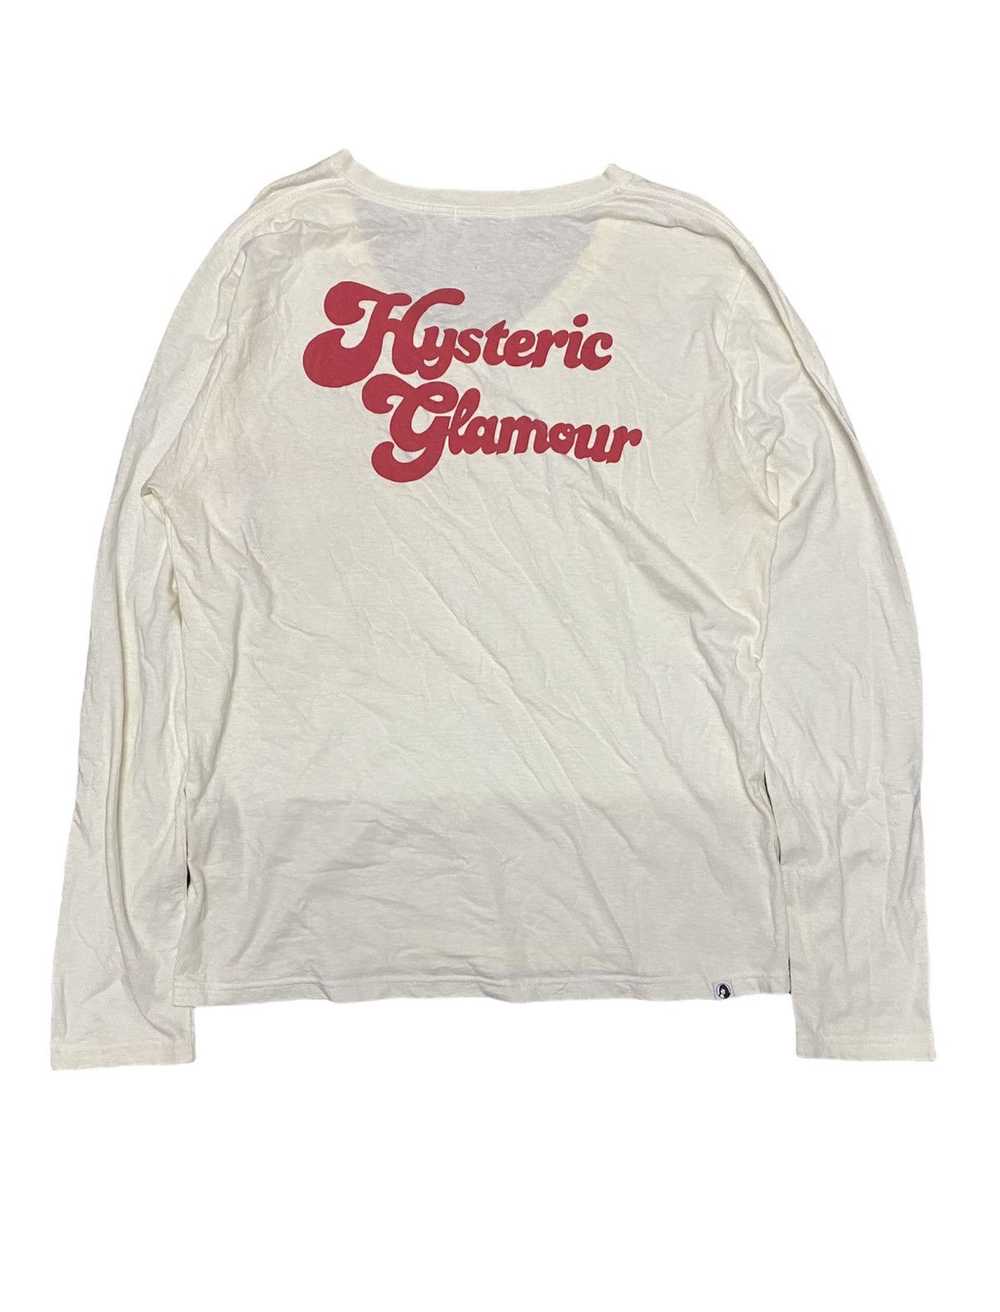 Hysteric Glamour Iconic pinup girl LS - image 4